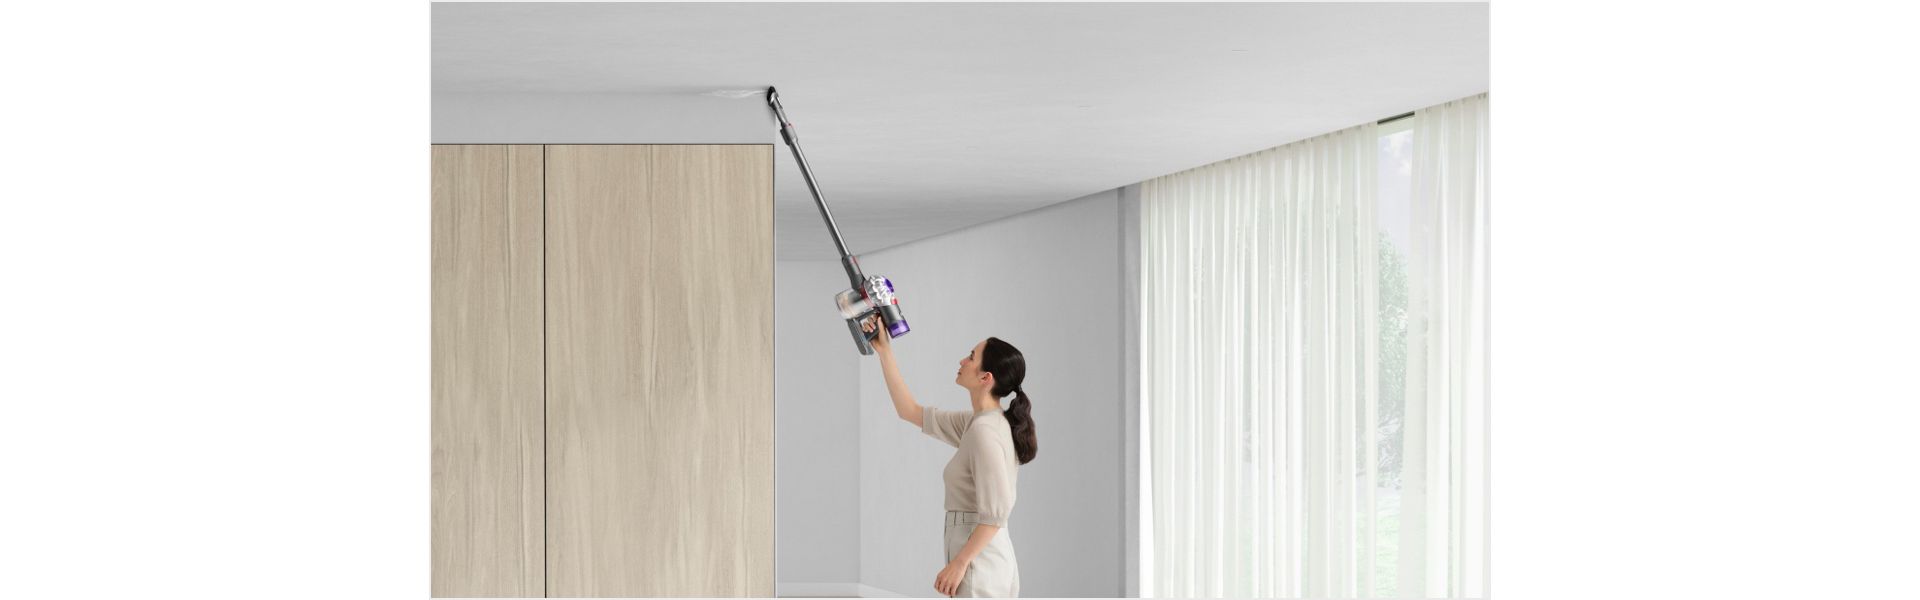 Woman cleaning up high with Dyson V8 vacuum